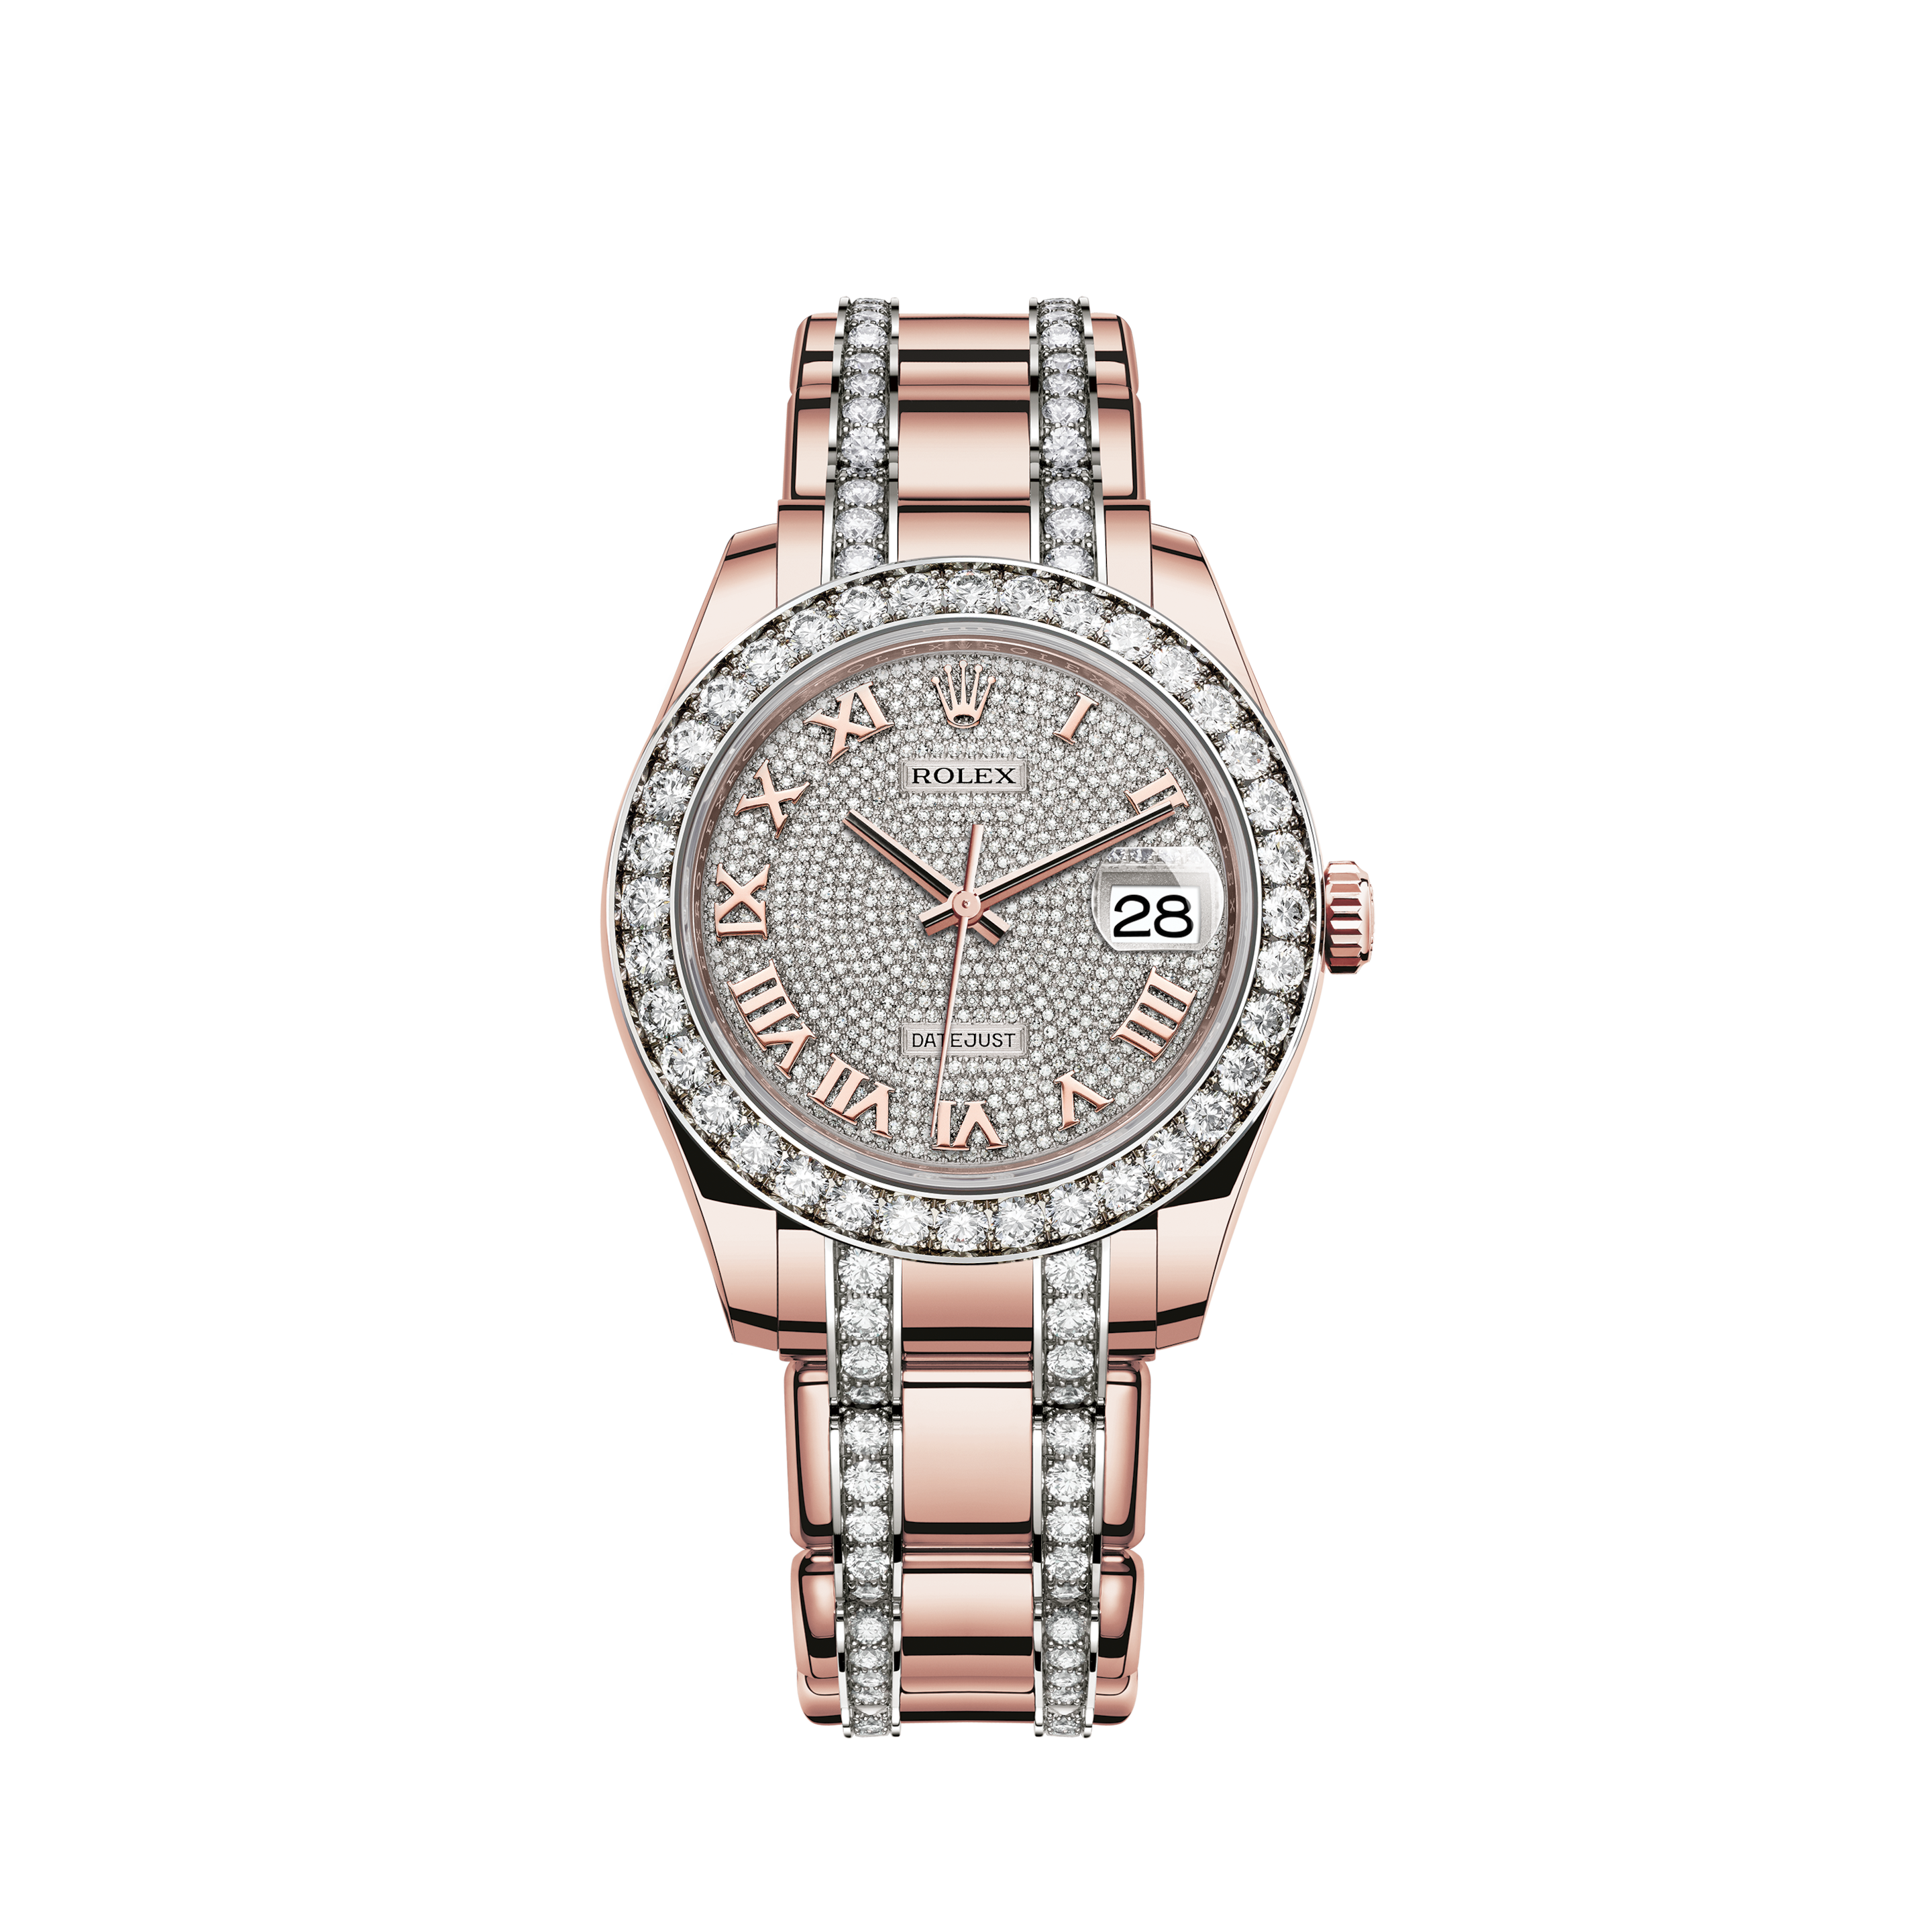 Rolex Women's New Style Two-Tone Datejust with Custom Fluted Bezel and Green Diamond Dial on Oyster Band